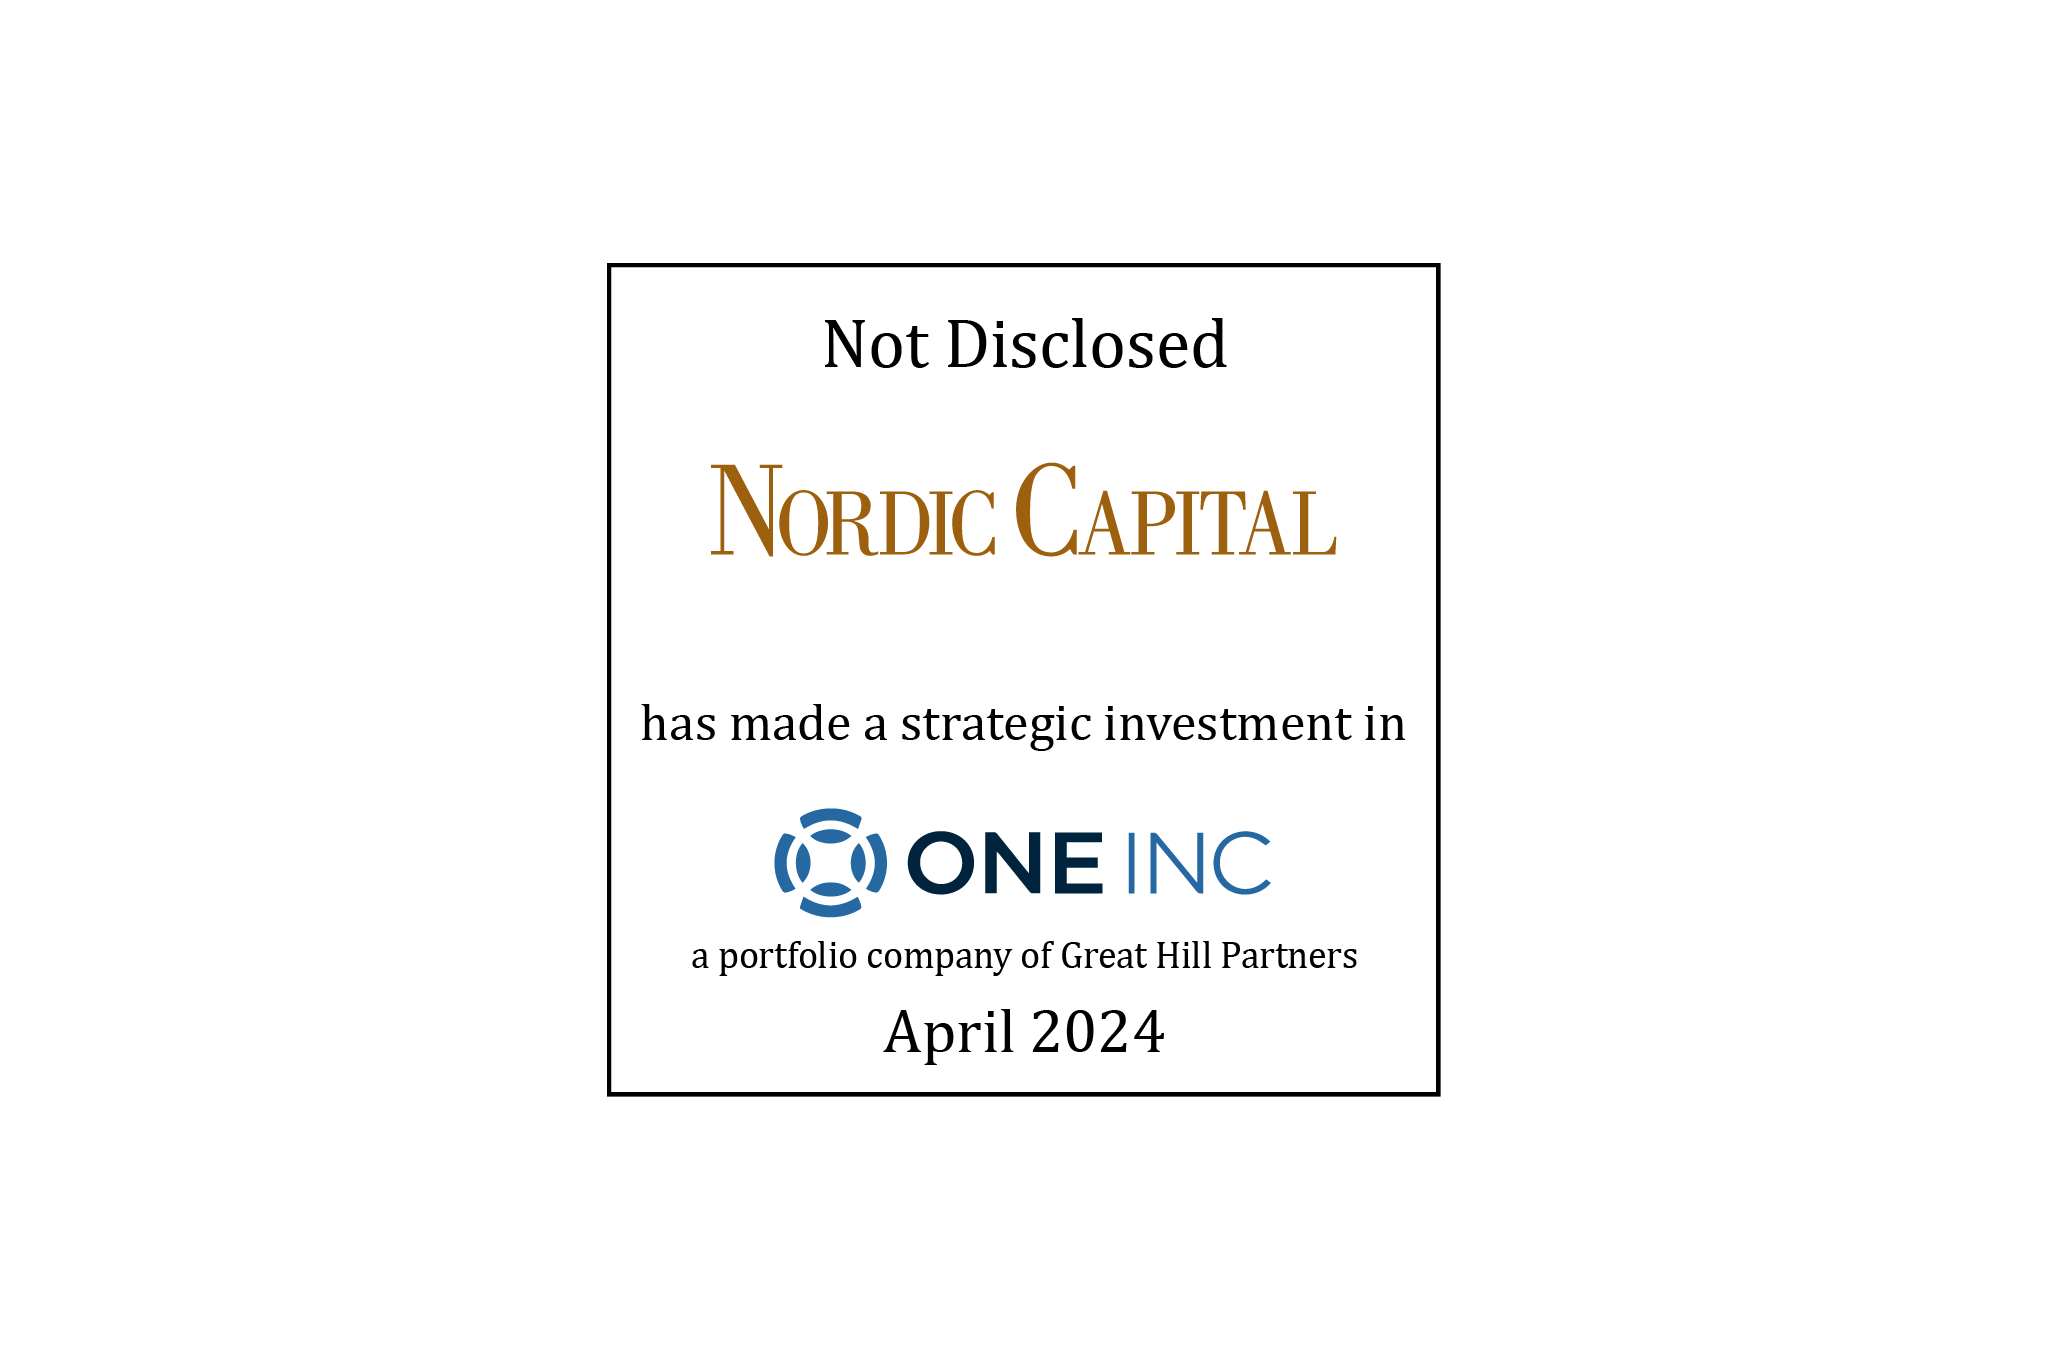 Not Disclosed | Nordic Capital (logo) has made a strategic investment in One Inc (logo), a portfolio company of Great Hill Partners | April 2024